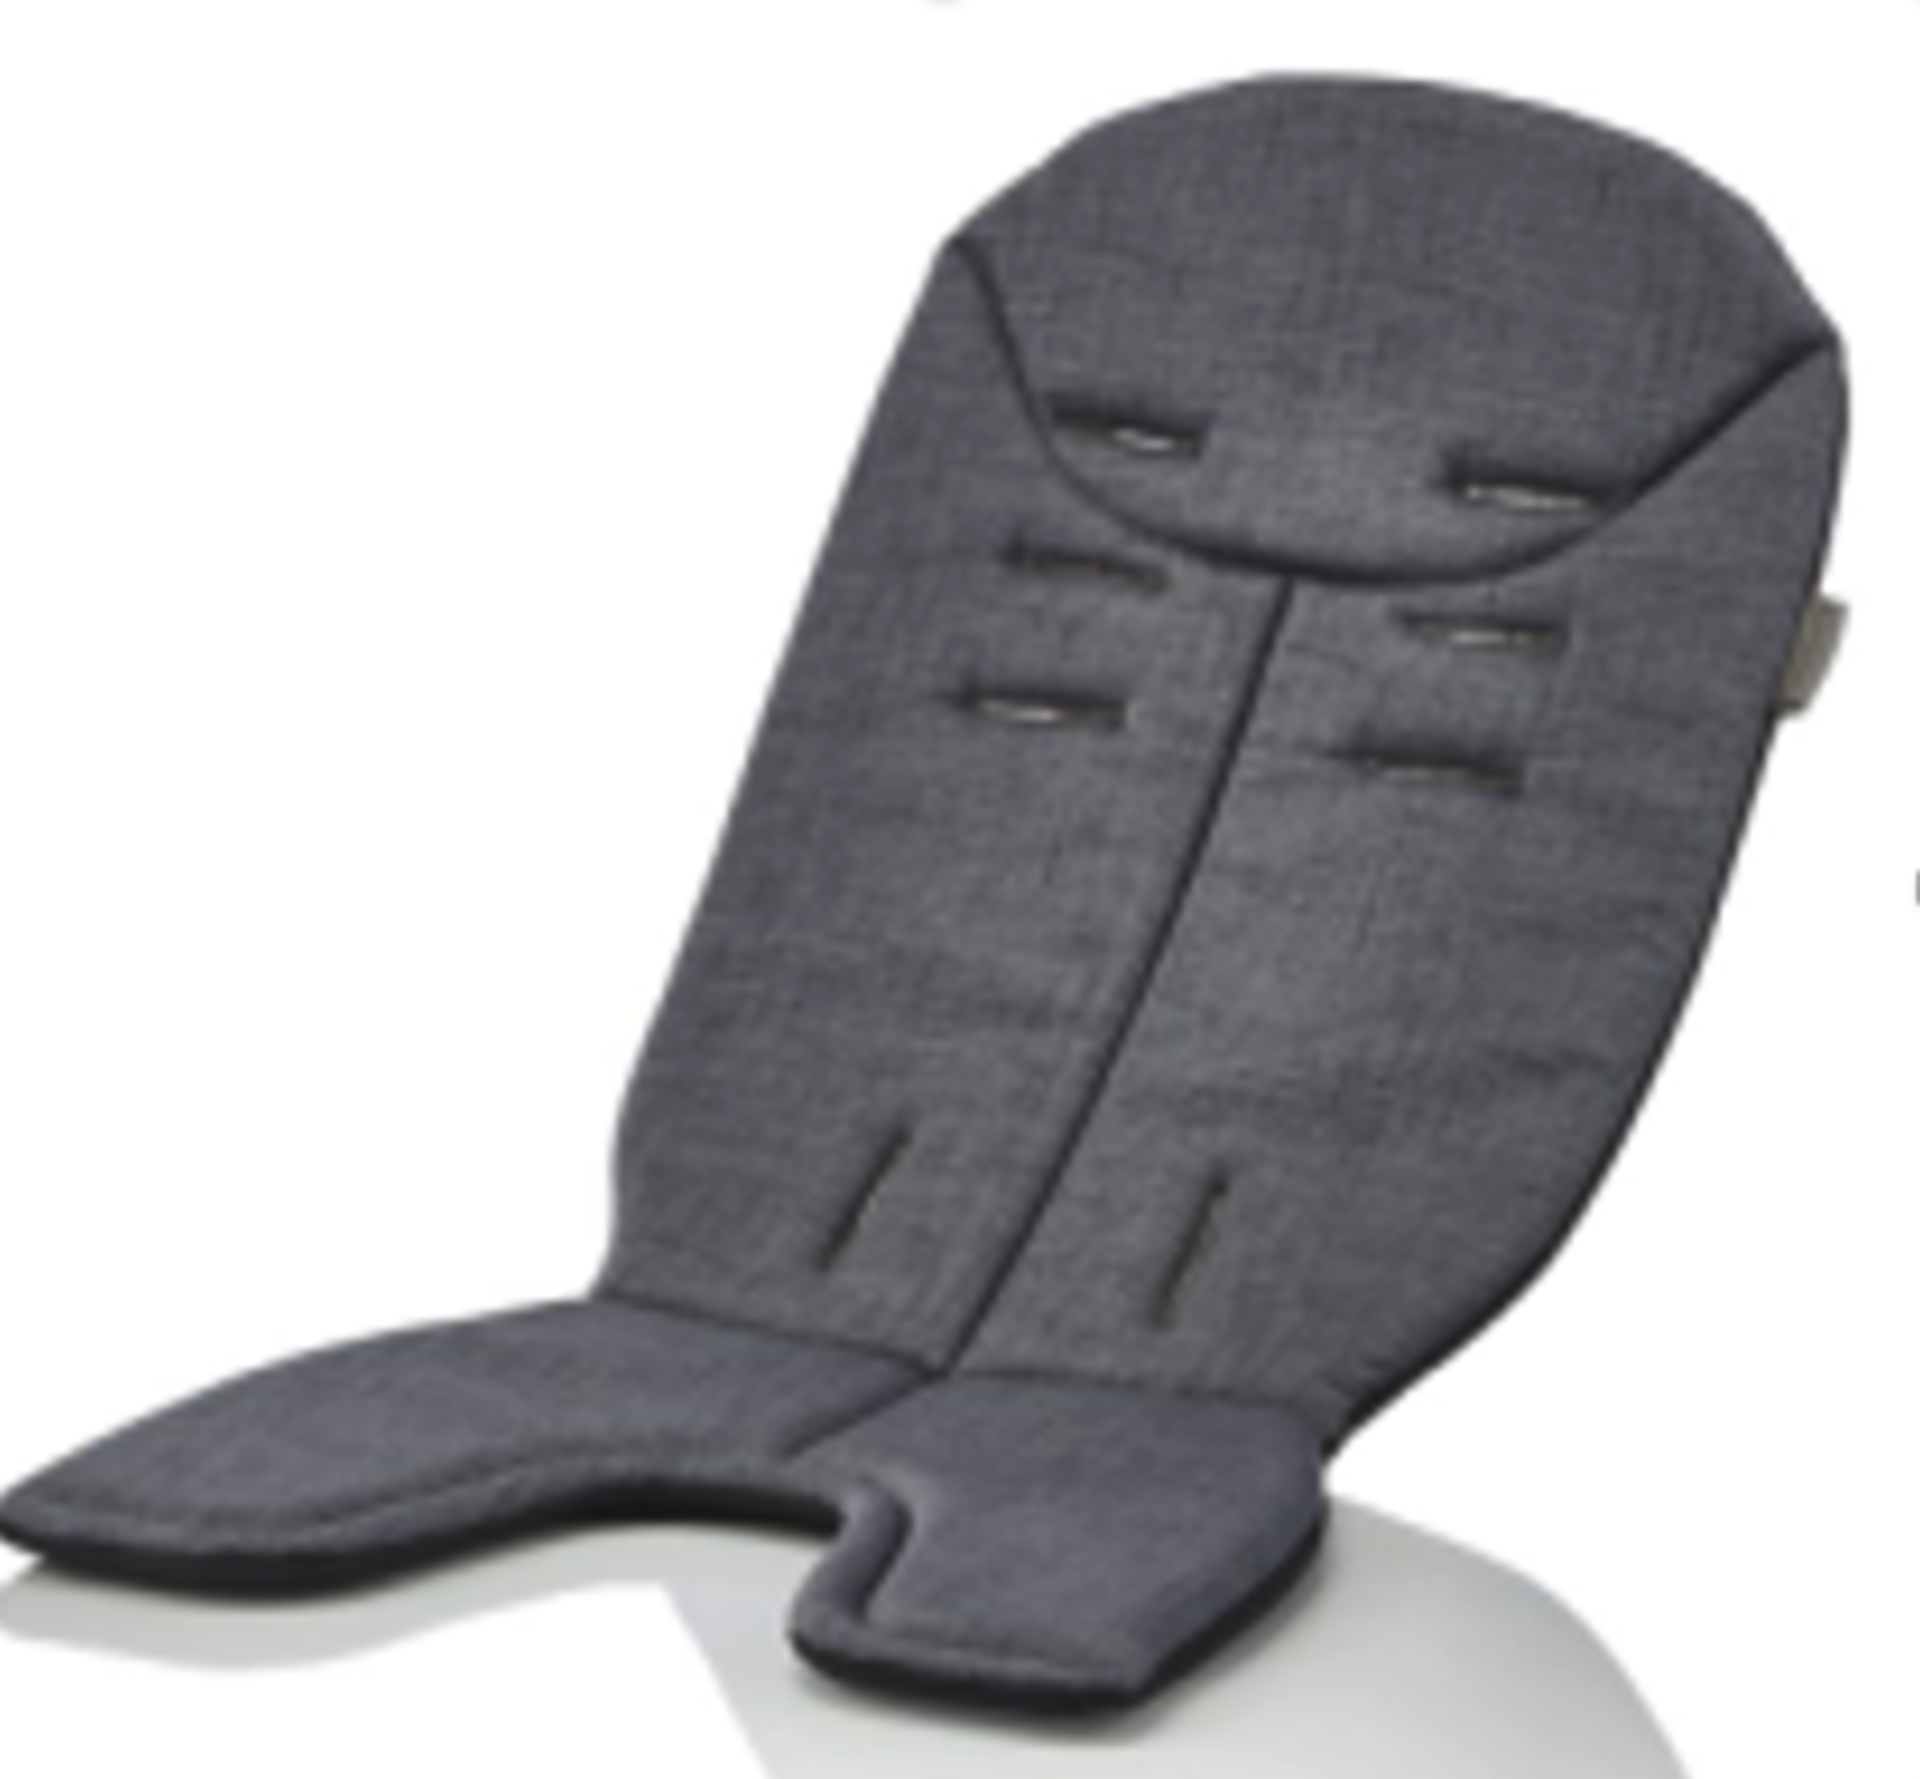 UNIVERSAL SEAT LINER - FROST GREY